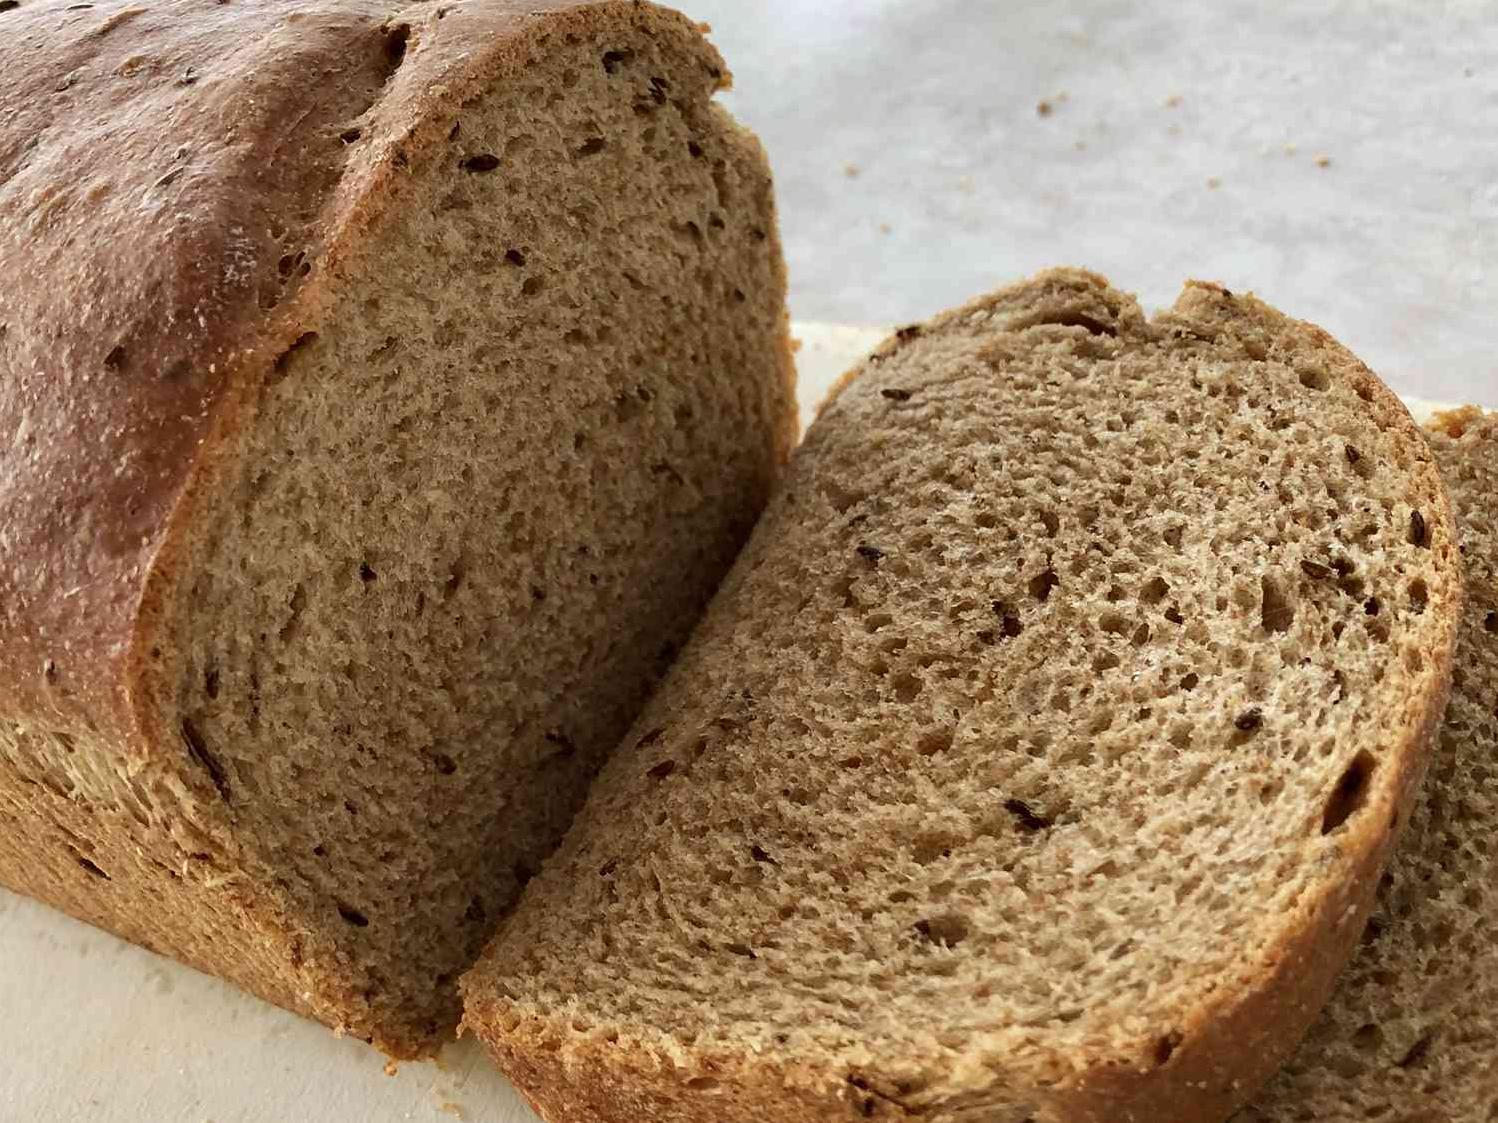  A crusty, crunchy crust and a soft, flavorful center- that's what makes this bread so special.